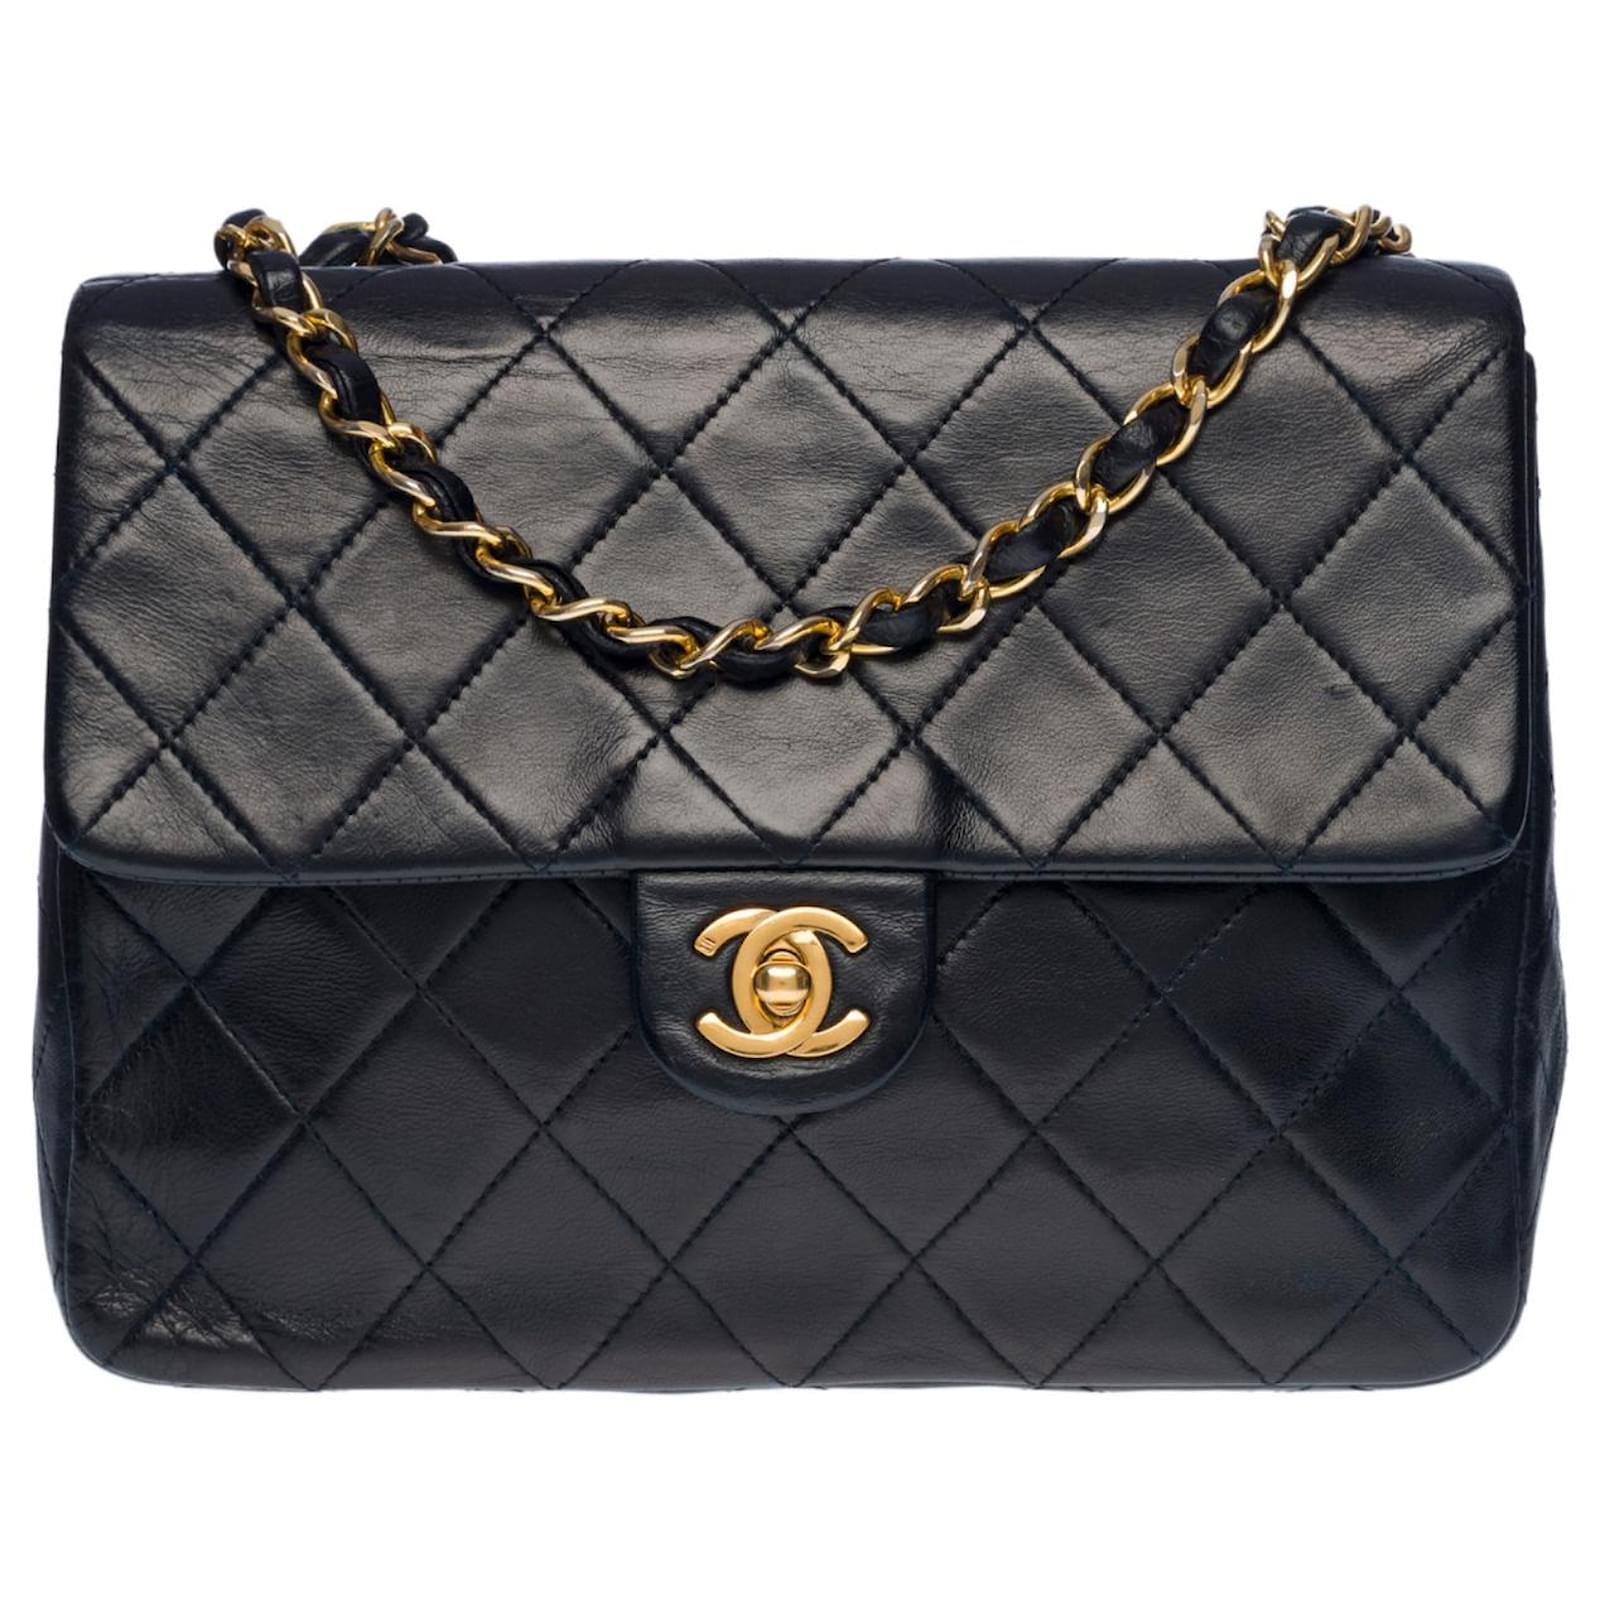 Splendid Chanel Mini Timeless Flap bag in navy blue quilted